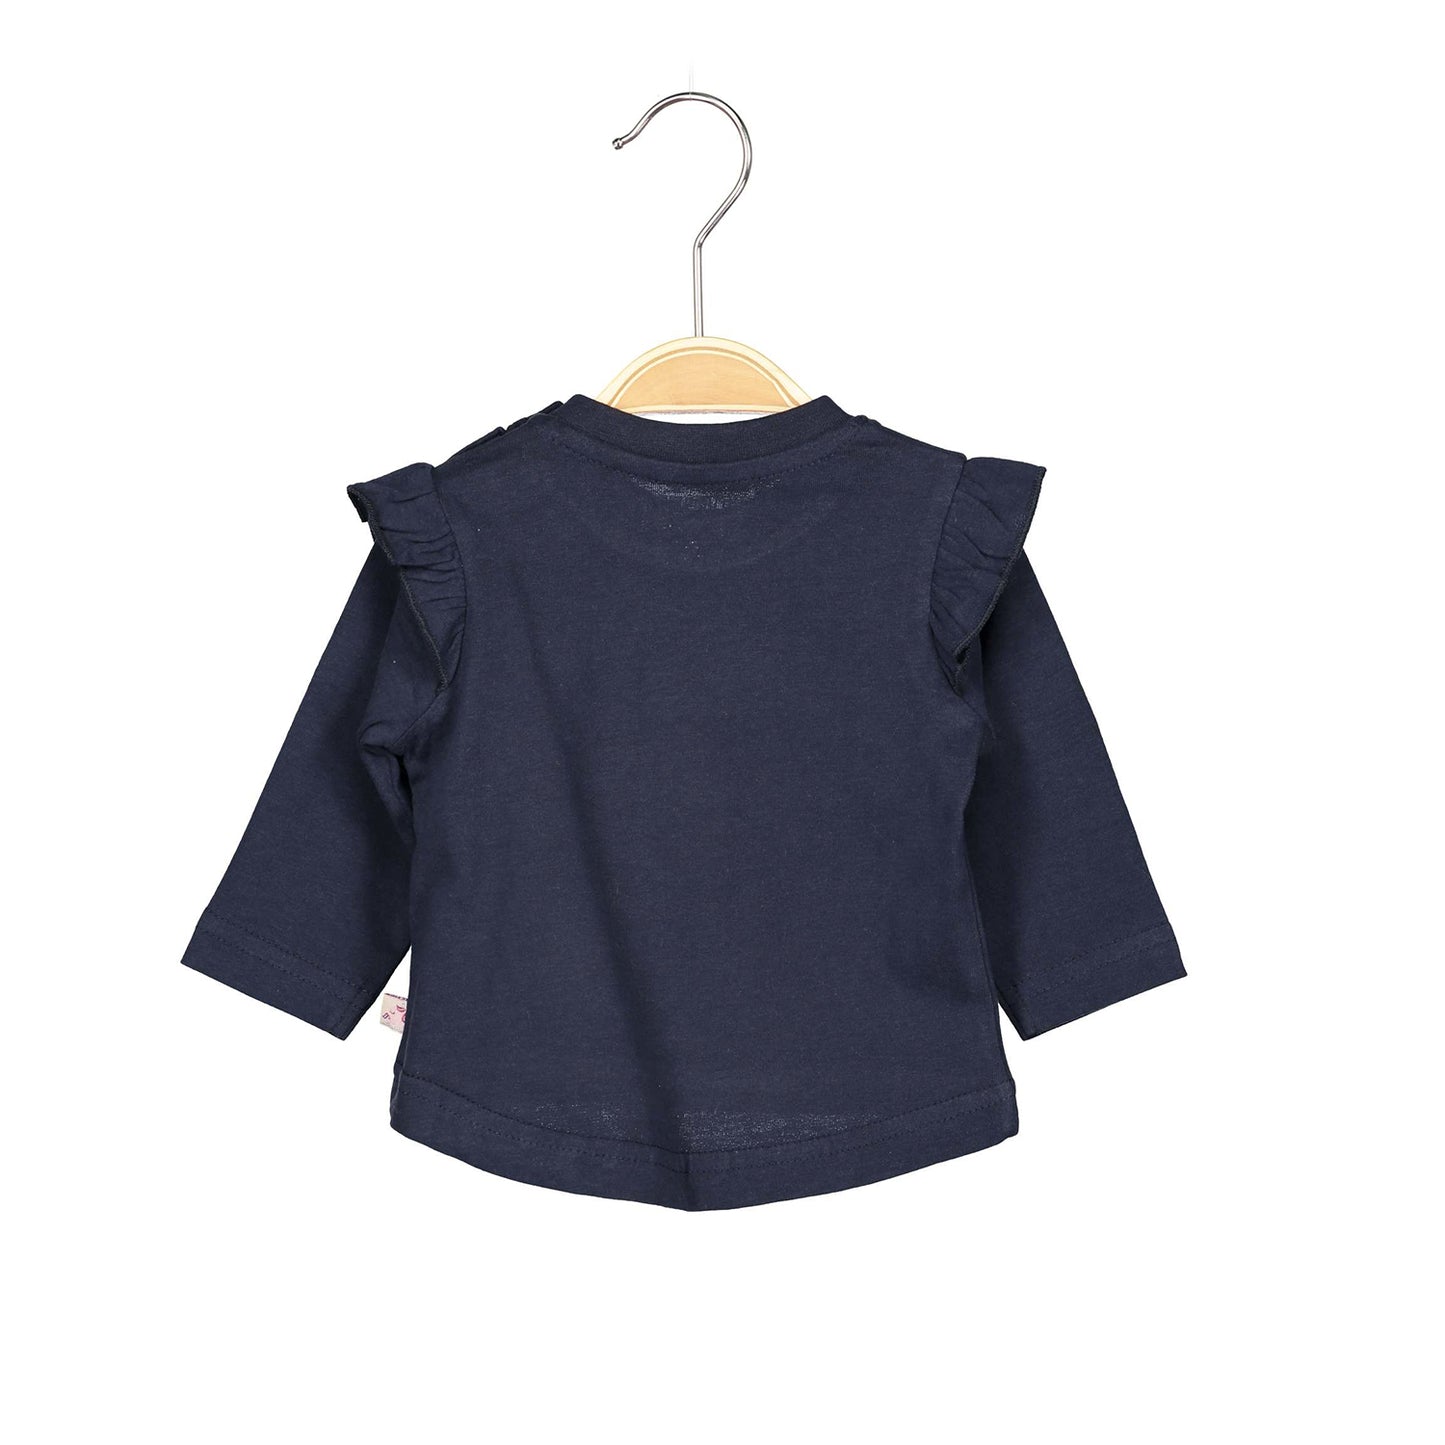 Blue Seven - Dark Blue Long Sleeves T-Shirt For Baby Girl LAST SIZE 3-6 MONTHS